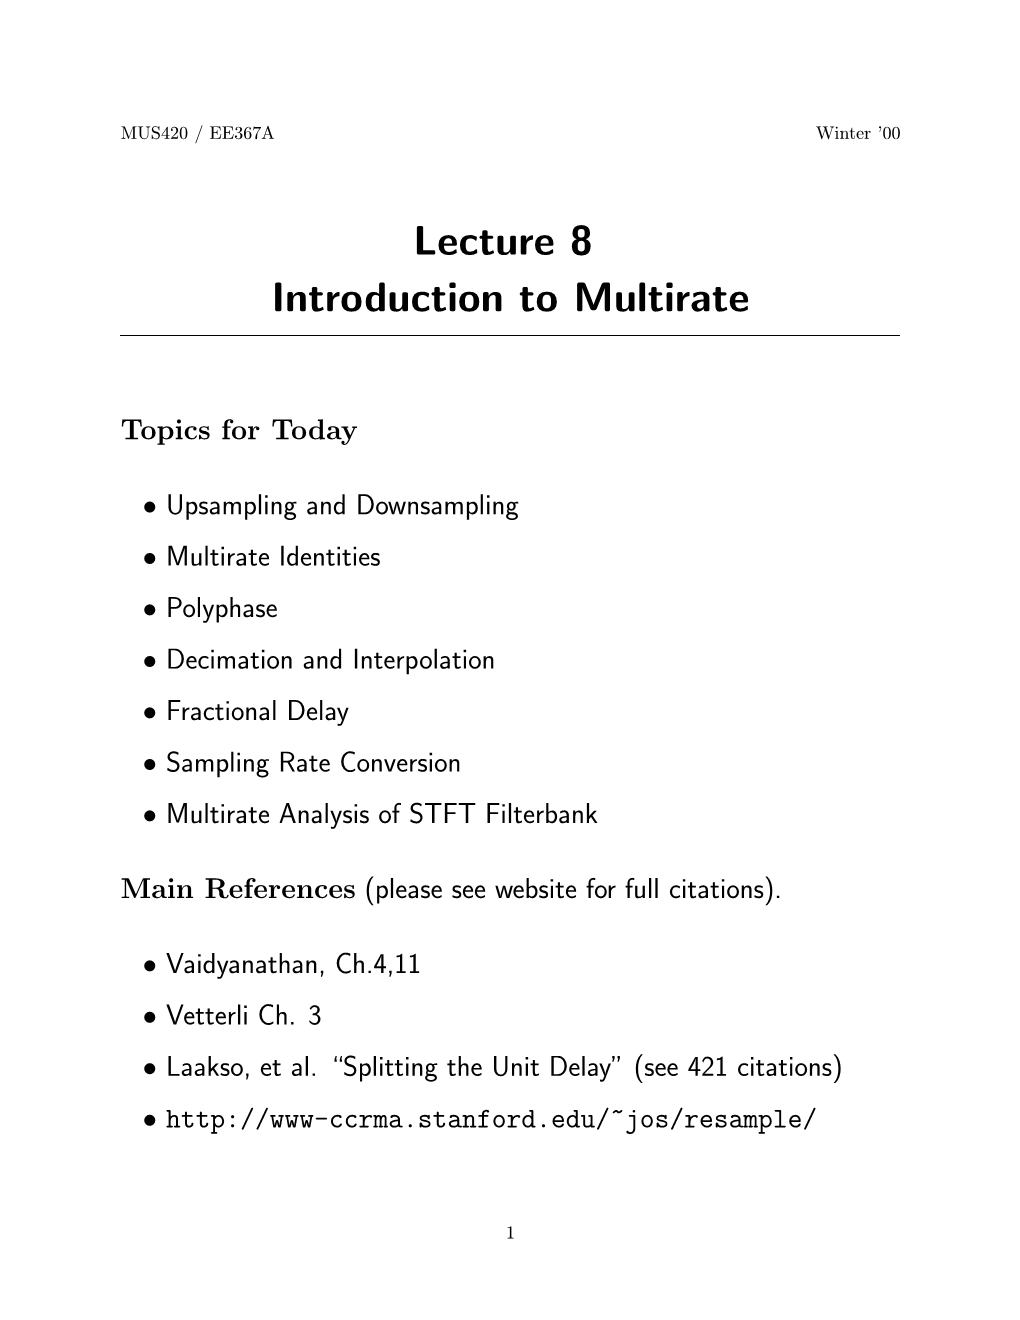 Lecture 8 Introduction to Multirate